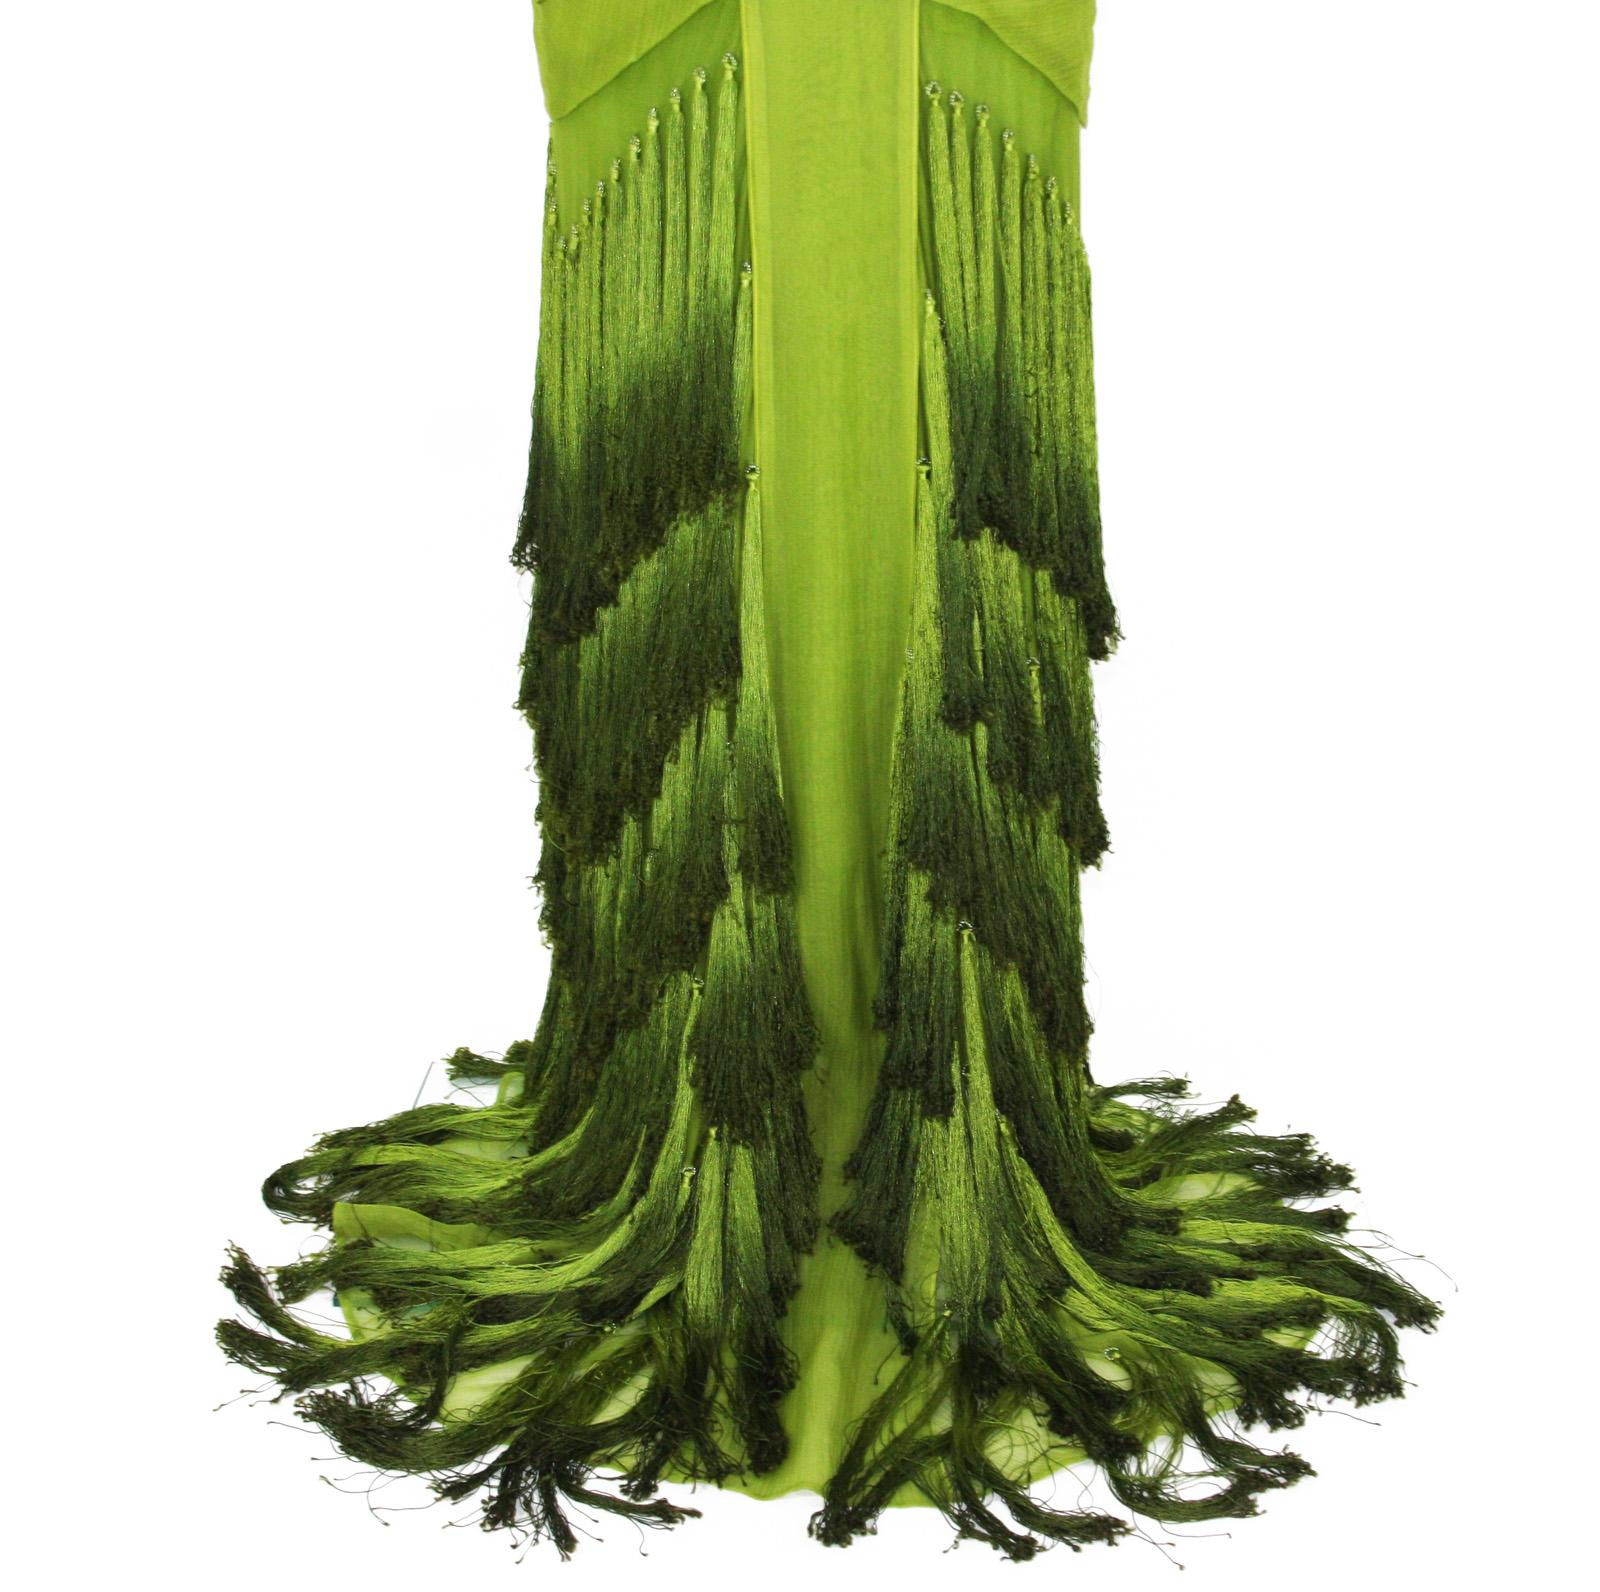 Tom Ford for Gucci 2004 F/W Collection Silk Green Tassel Dress Gown 40 - 4 5